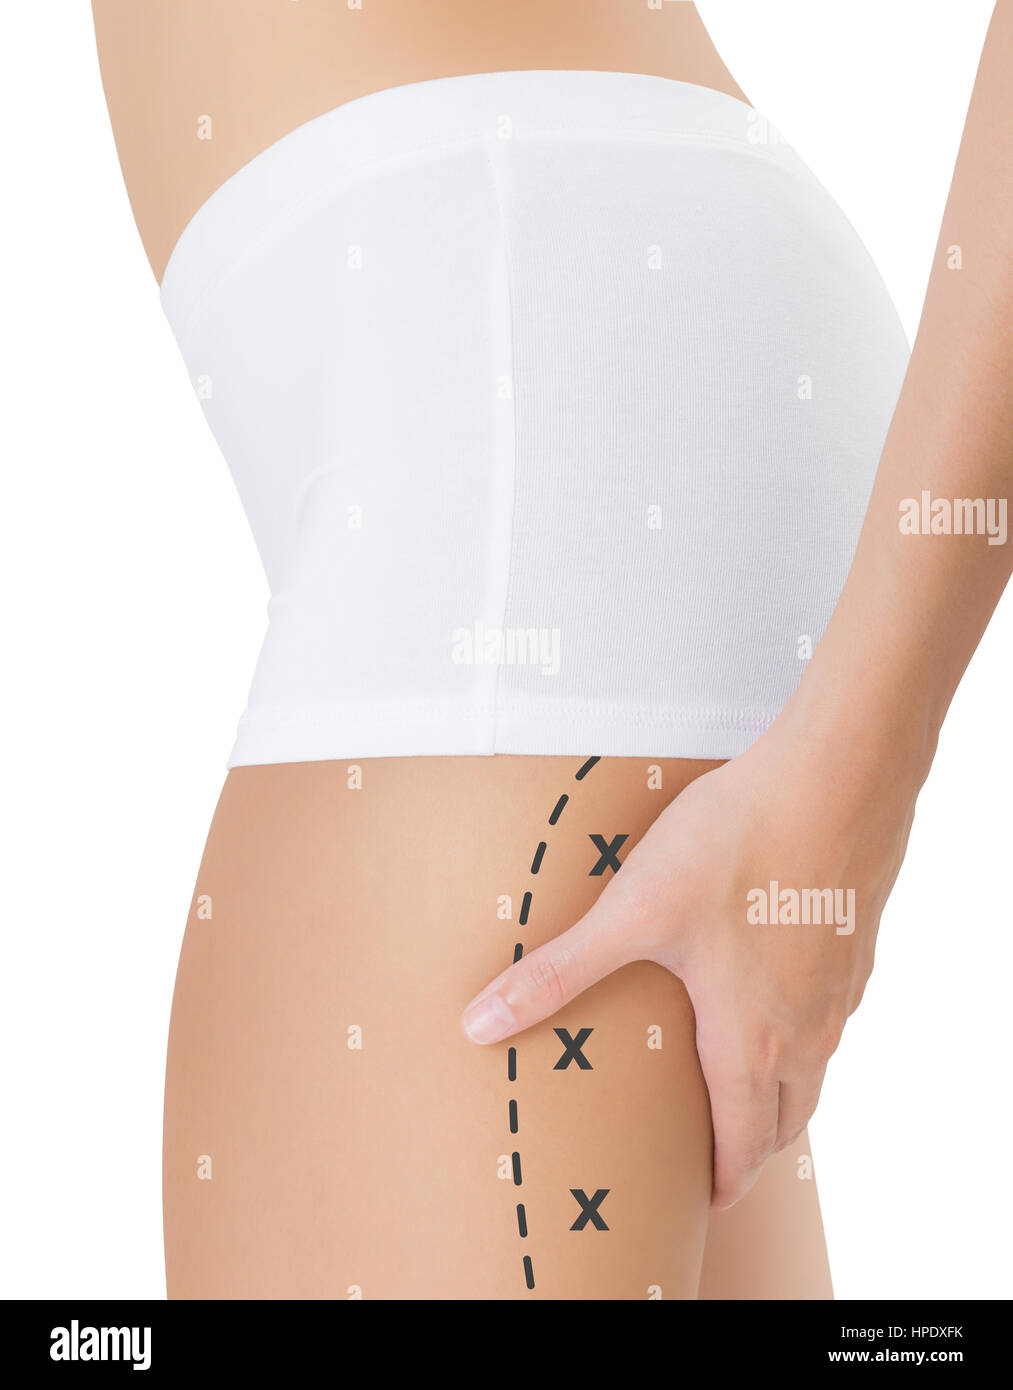 Woman squeezing rear thigh with the black color crosses marking, Lose weight and liposuction cellulite removal concept, Isolated on white background. Stock Photo